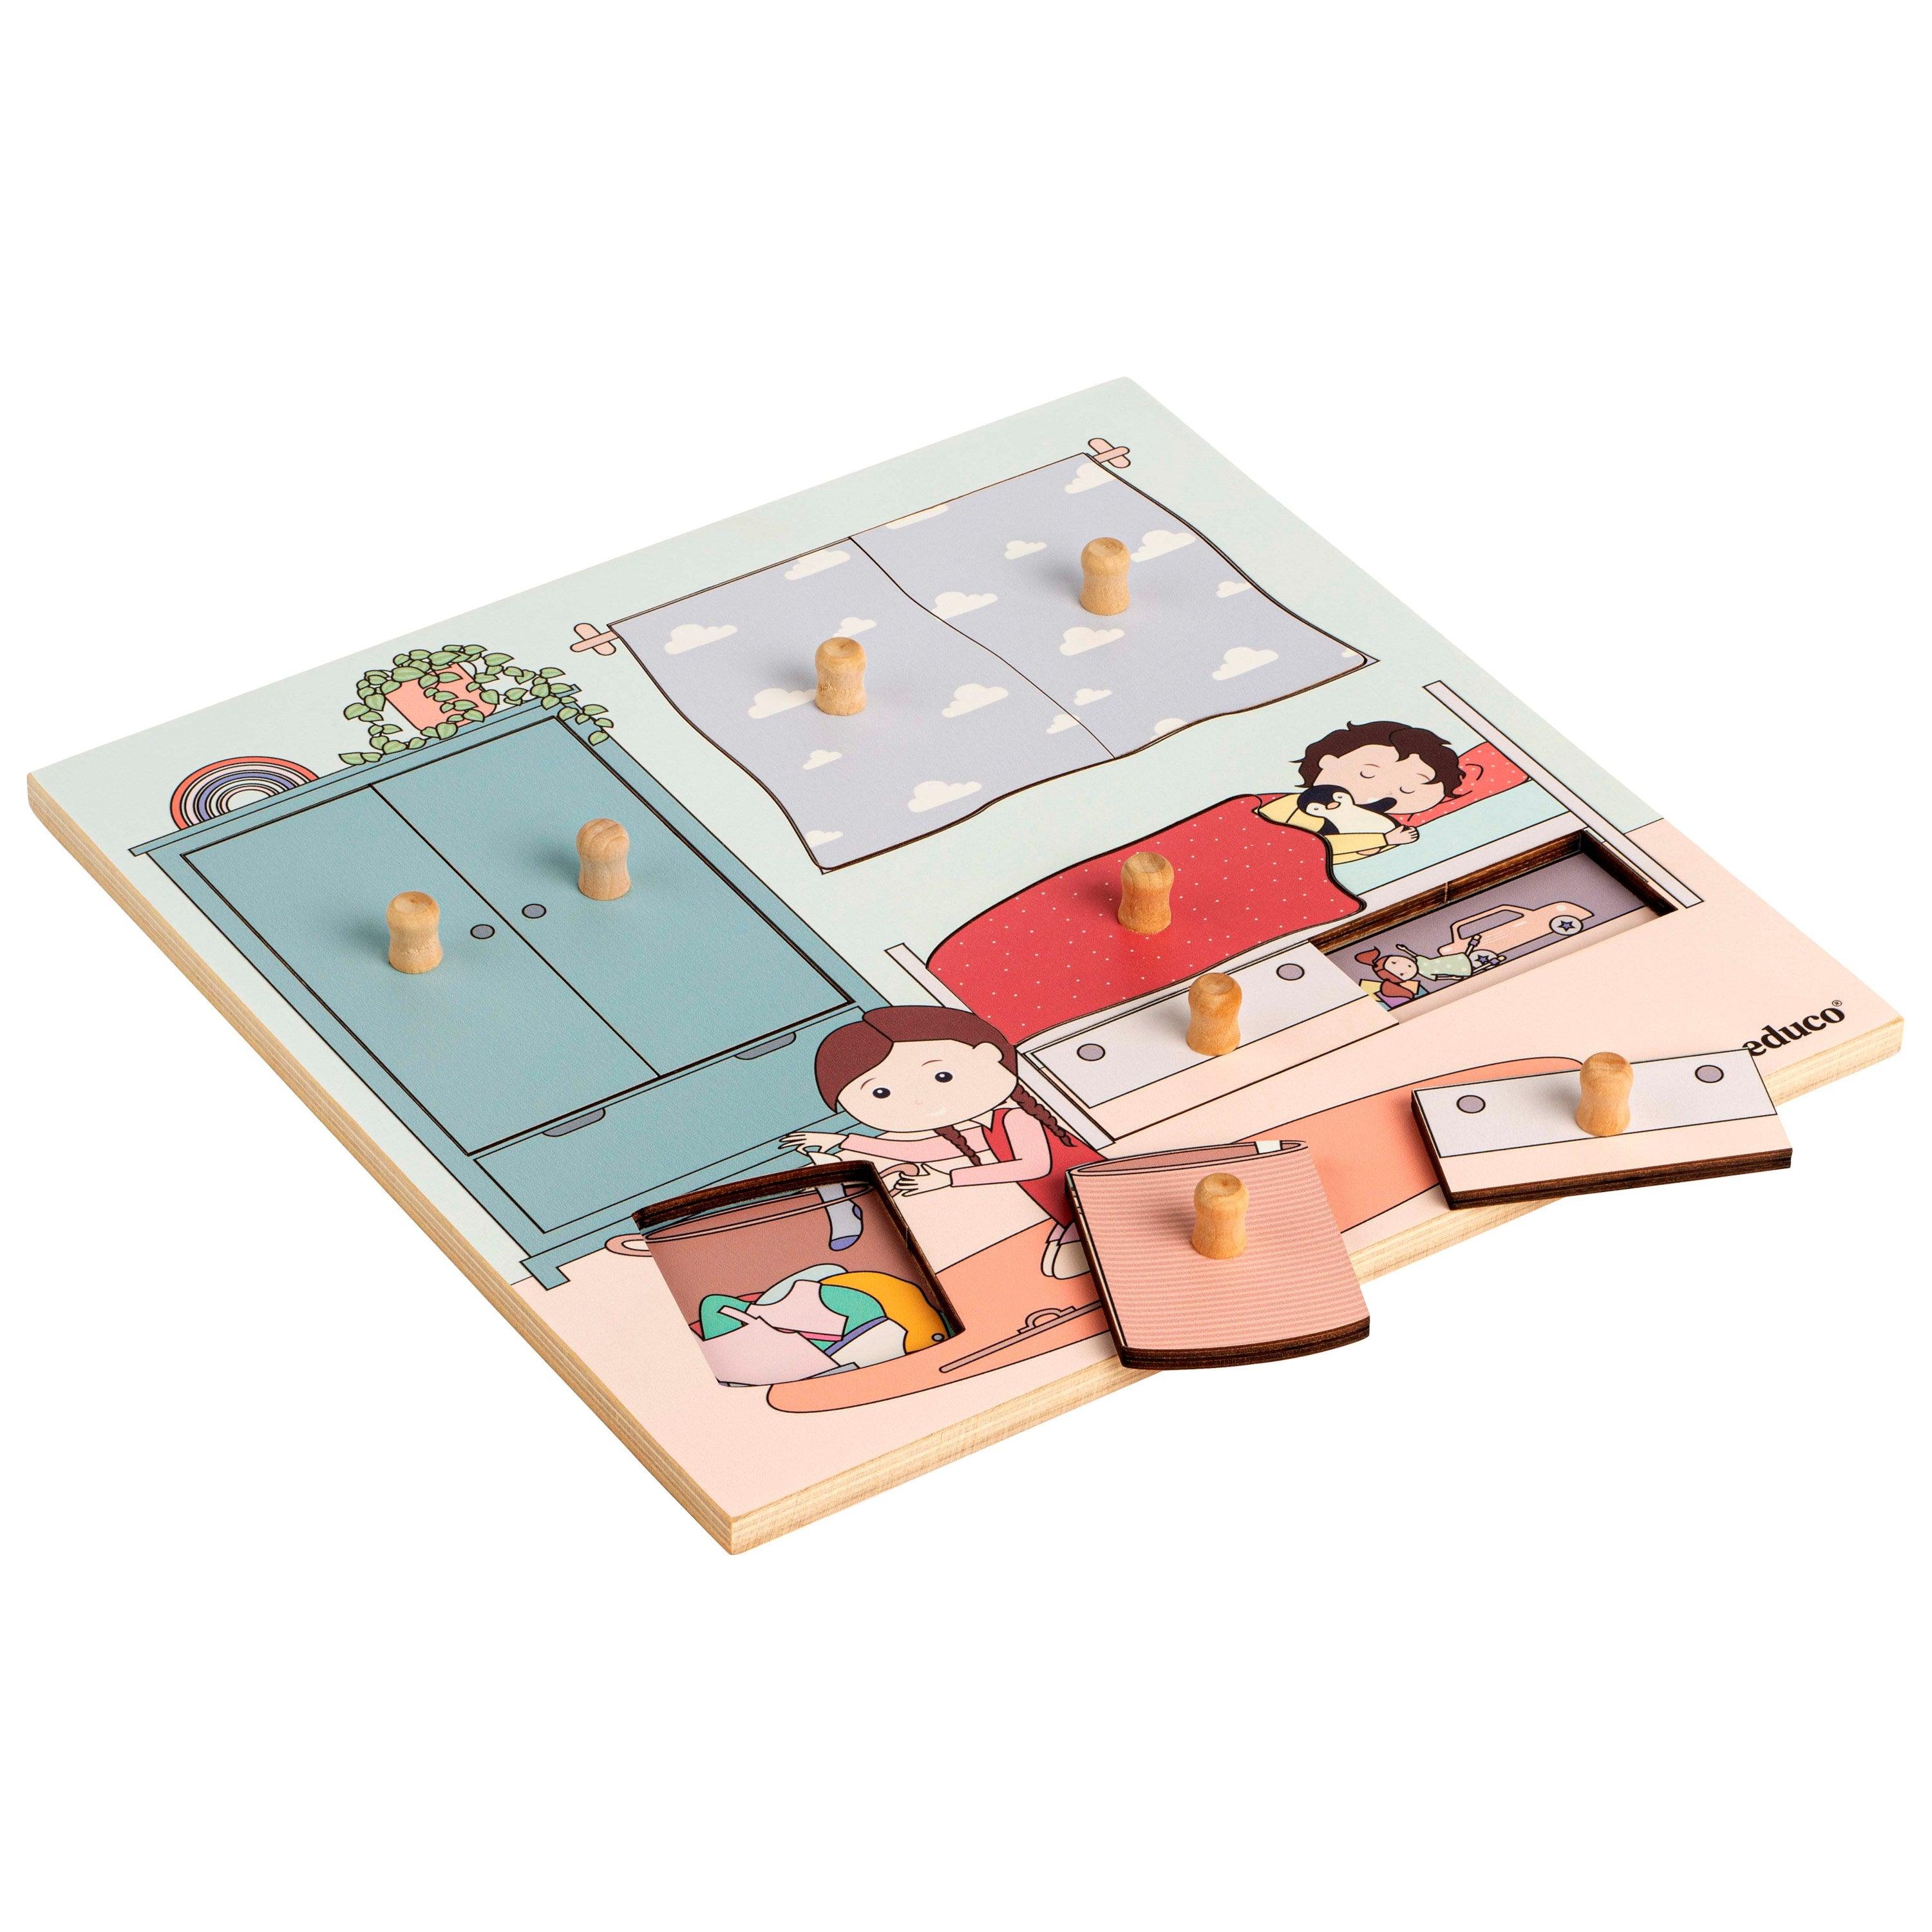 Educo: Surprise Puzzle The Bedroom puzzles with clothespins